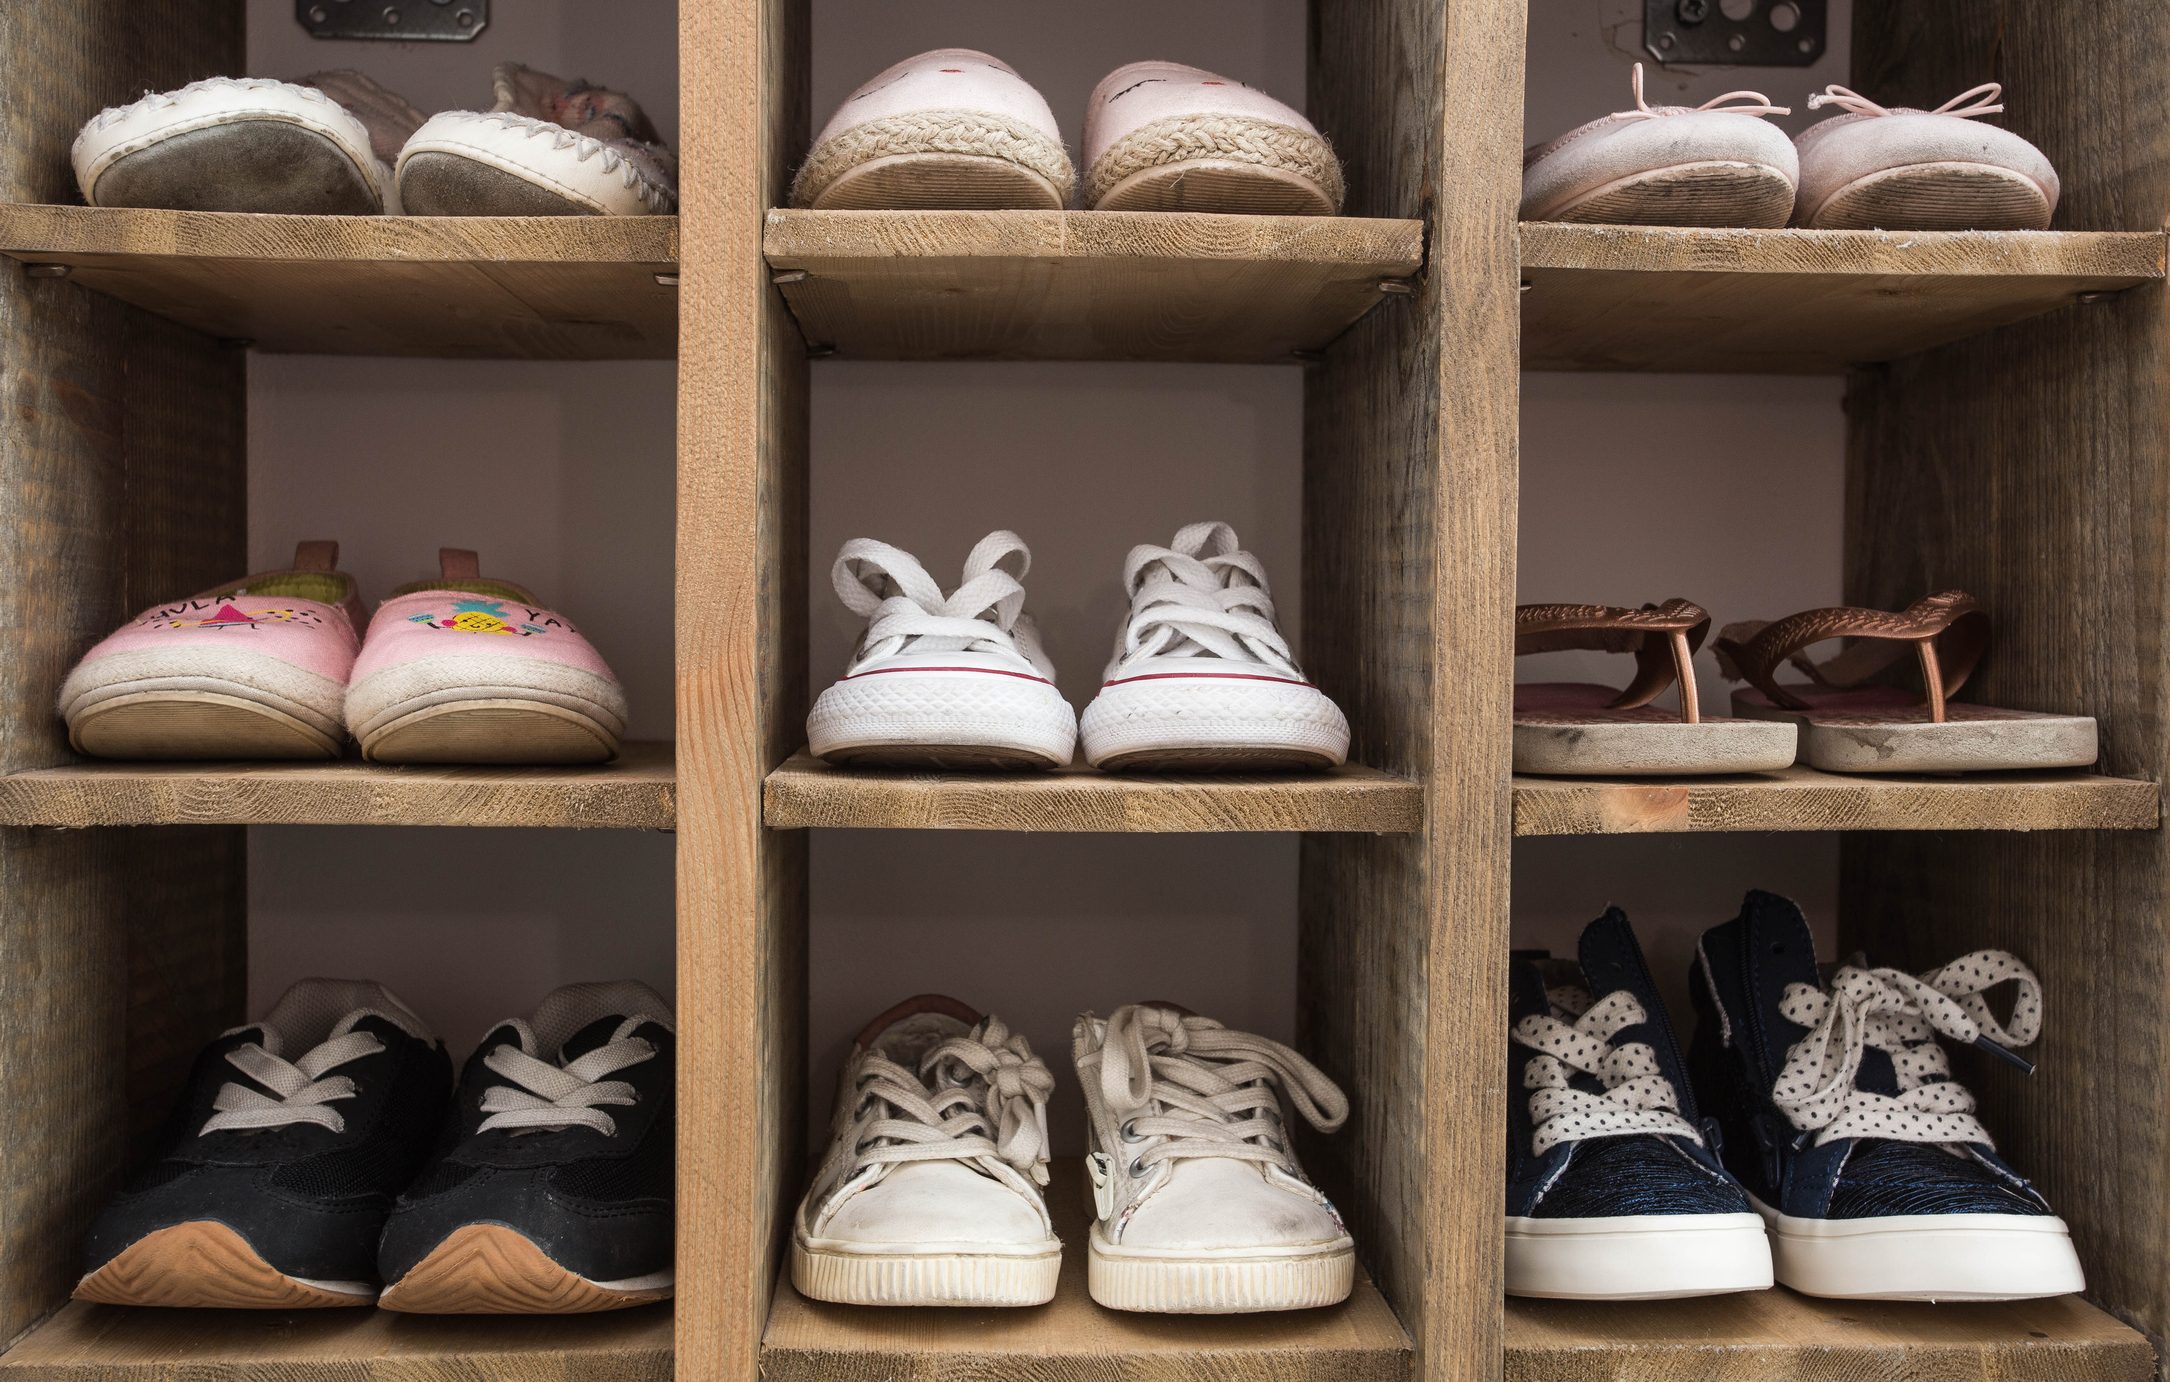 How to organize your walk-in closet